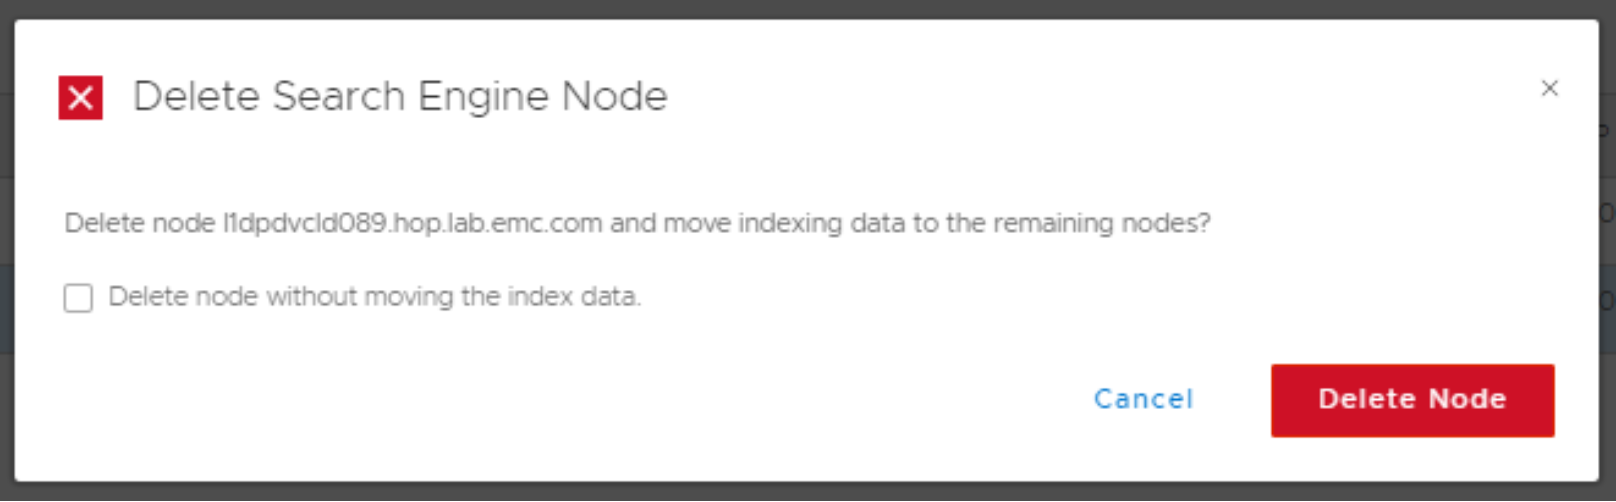 This Diagram depicts option to delete search engine node and move indexing data to remaining node 